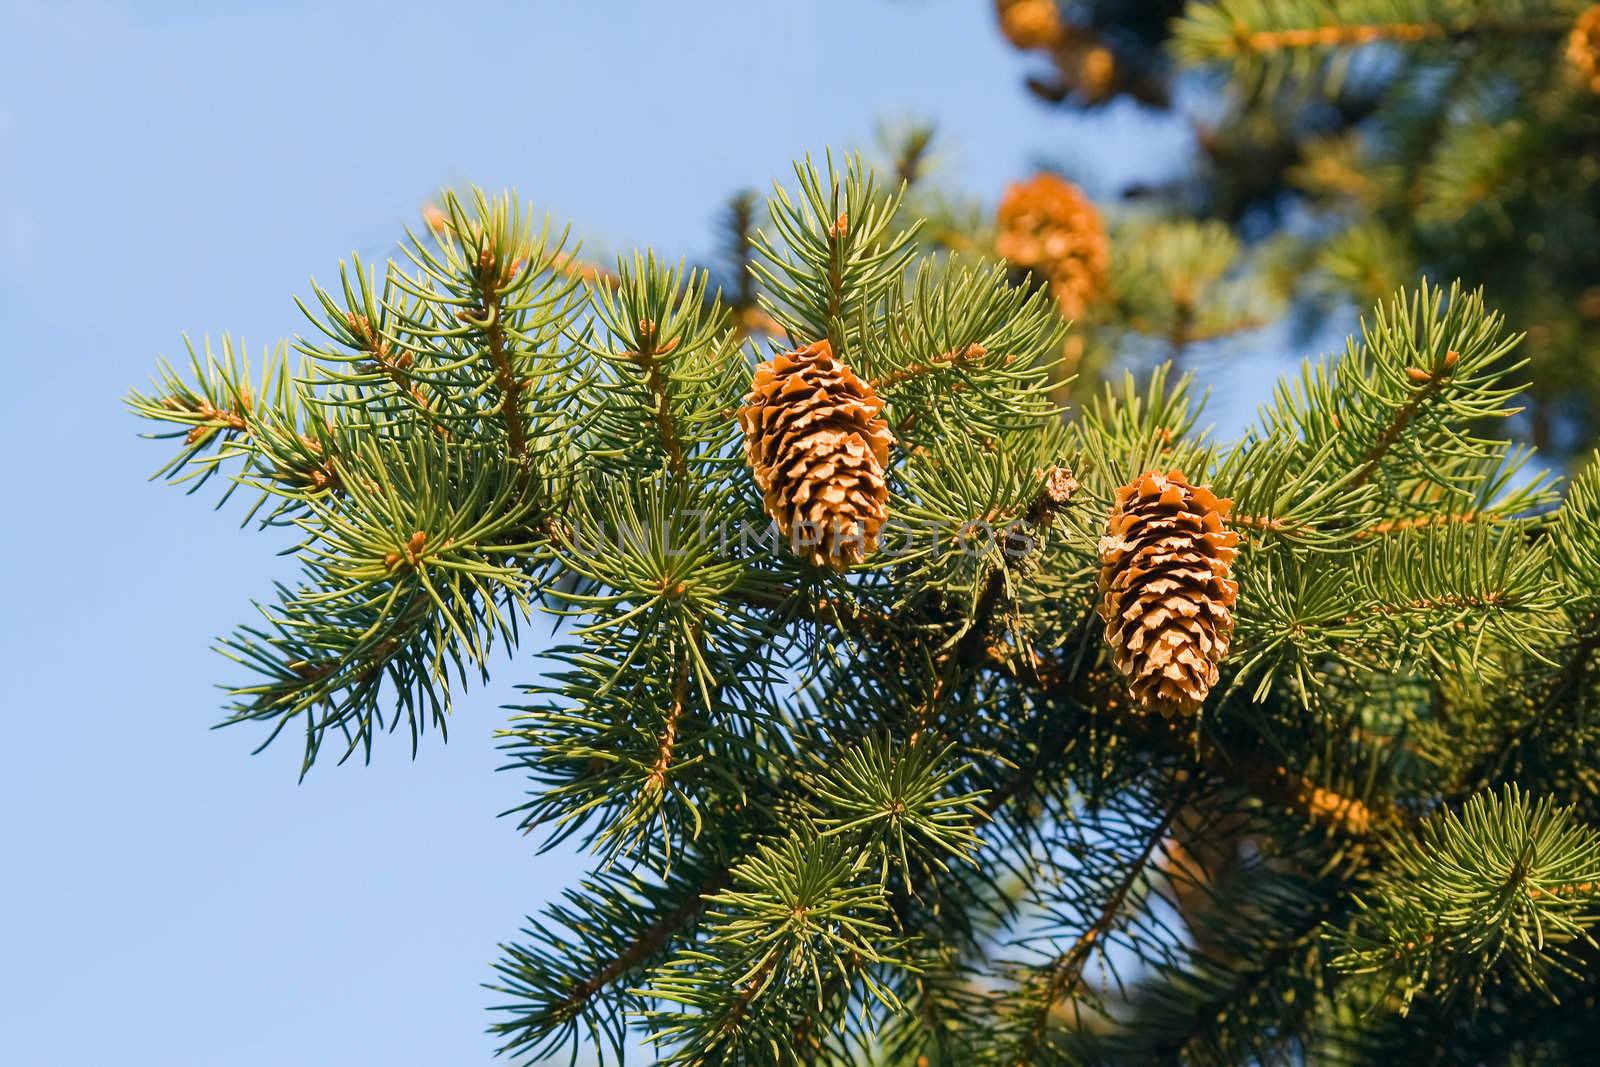 Fur-tree branches with cones over blue sky 